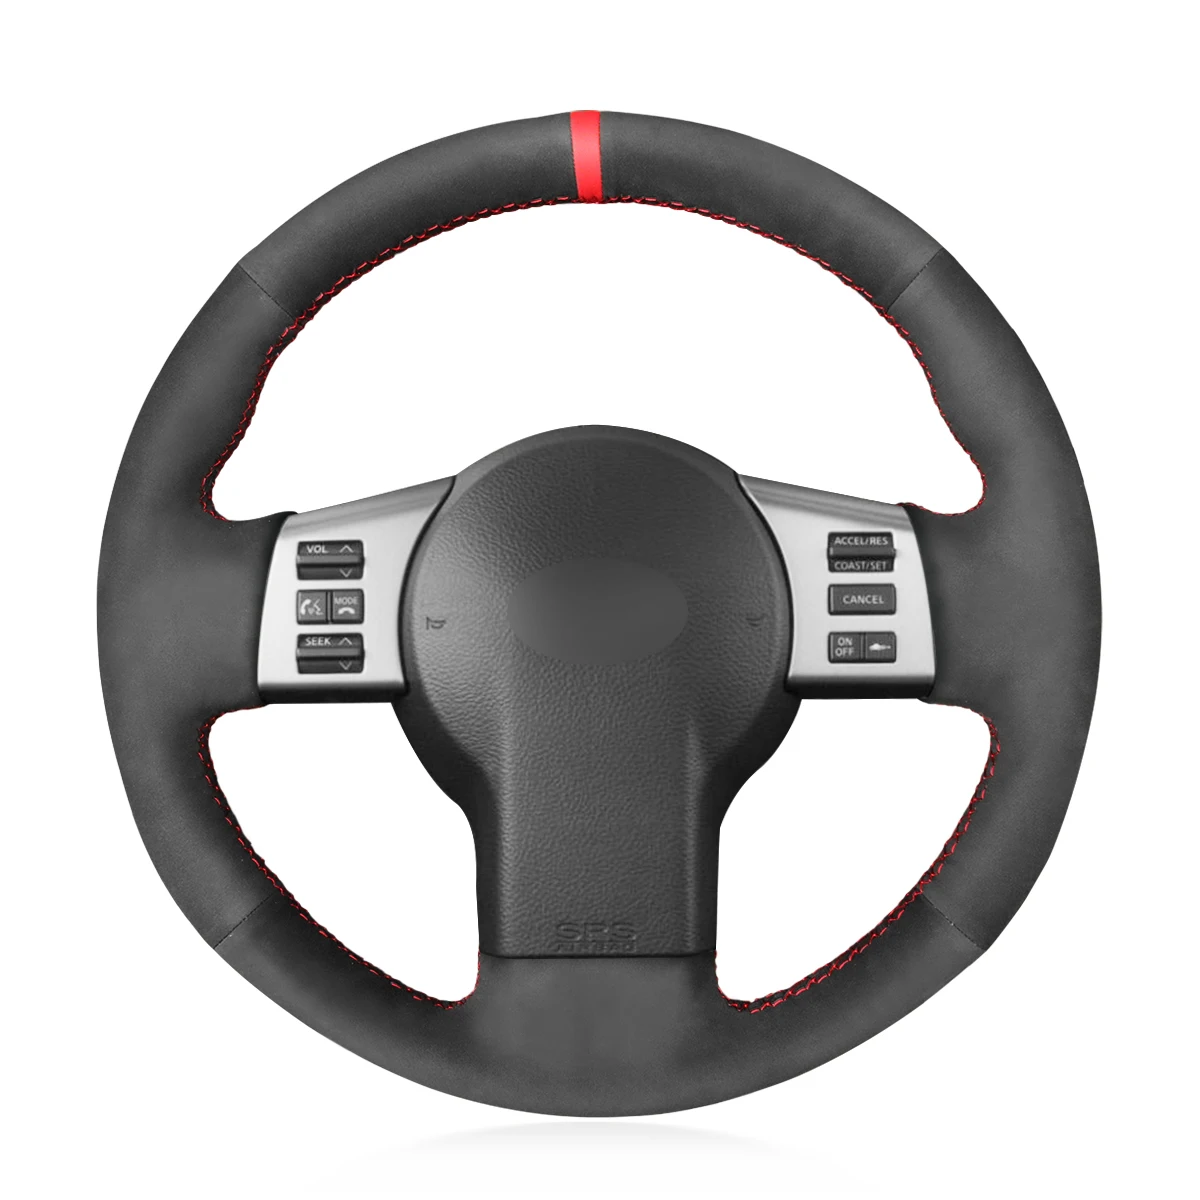 

Hand Stitching Black Suede Steering Wheel Cover for Nissan 350Z Z33 Infiniti FX35 FX45 2003 2004 2005 2006 2007 2008